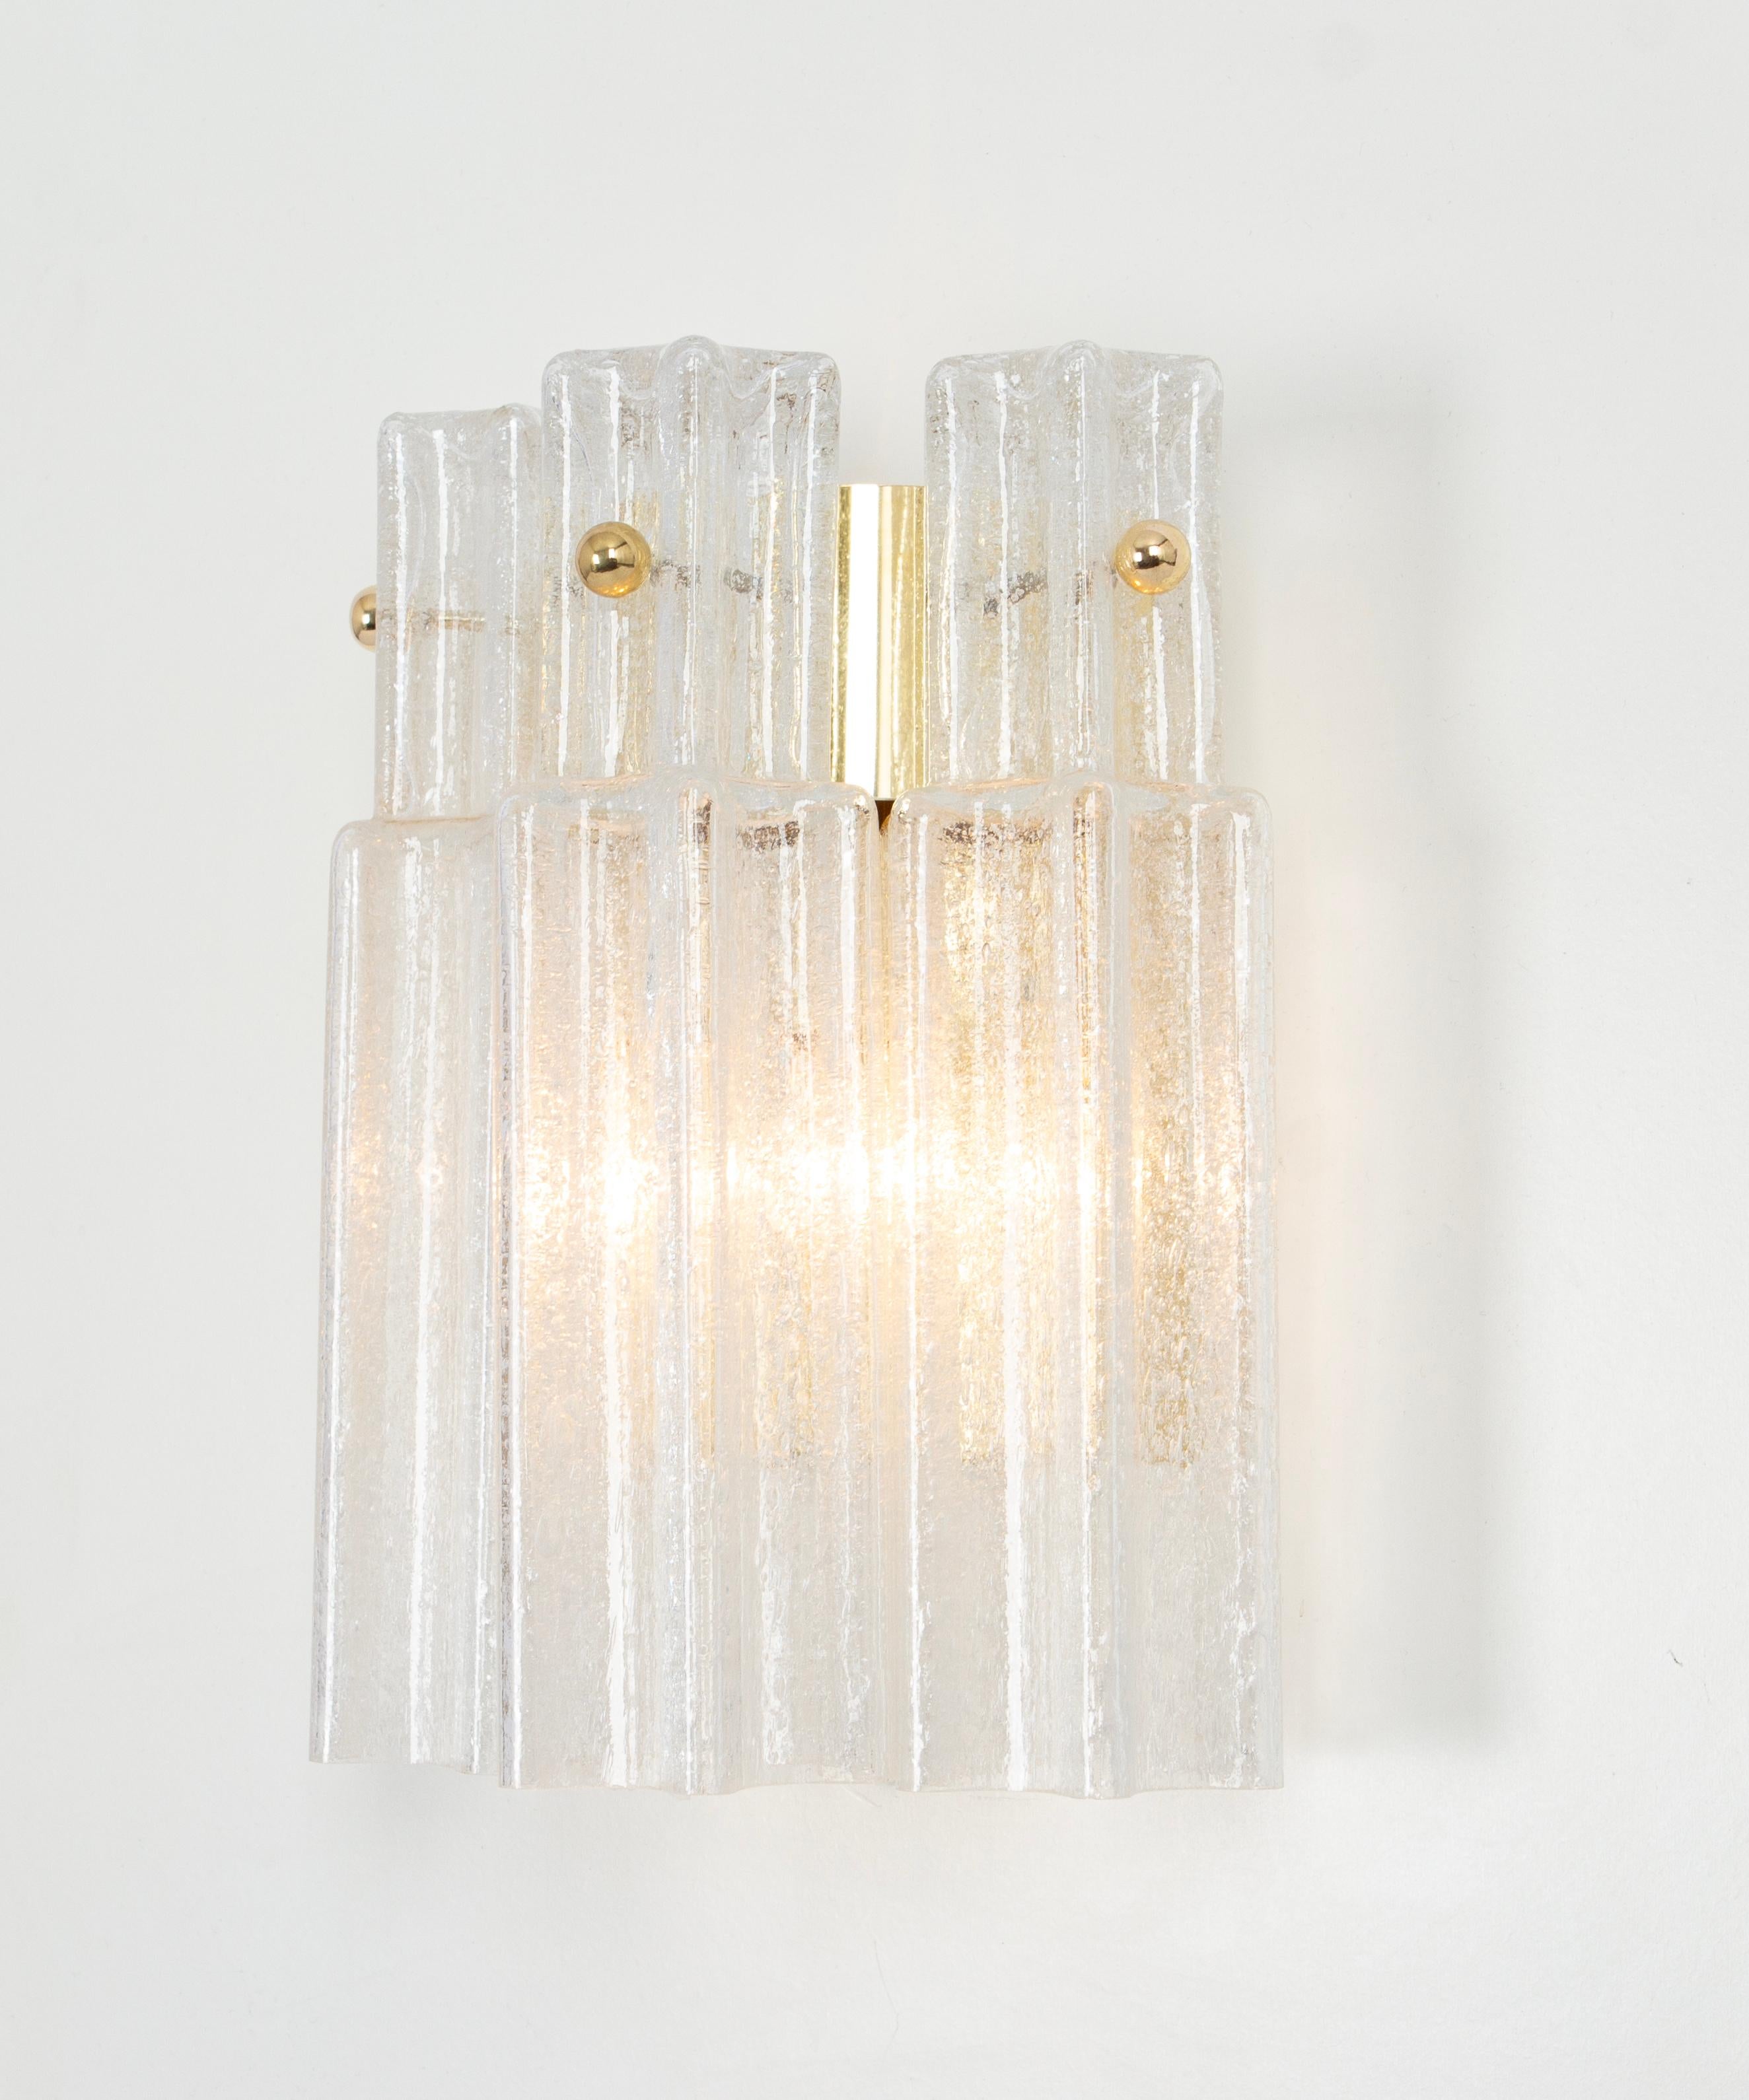 Mid-20th Century 1 of 2 Sets of Frosted Glass Wall Lights by Limburg, Germany, 1960s For Sale